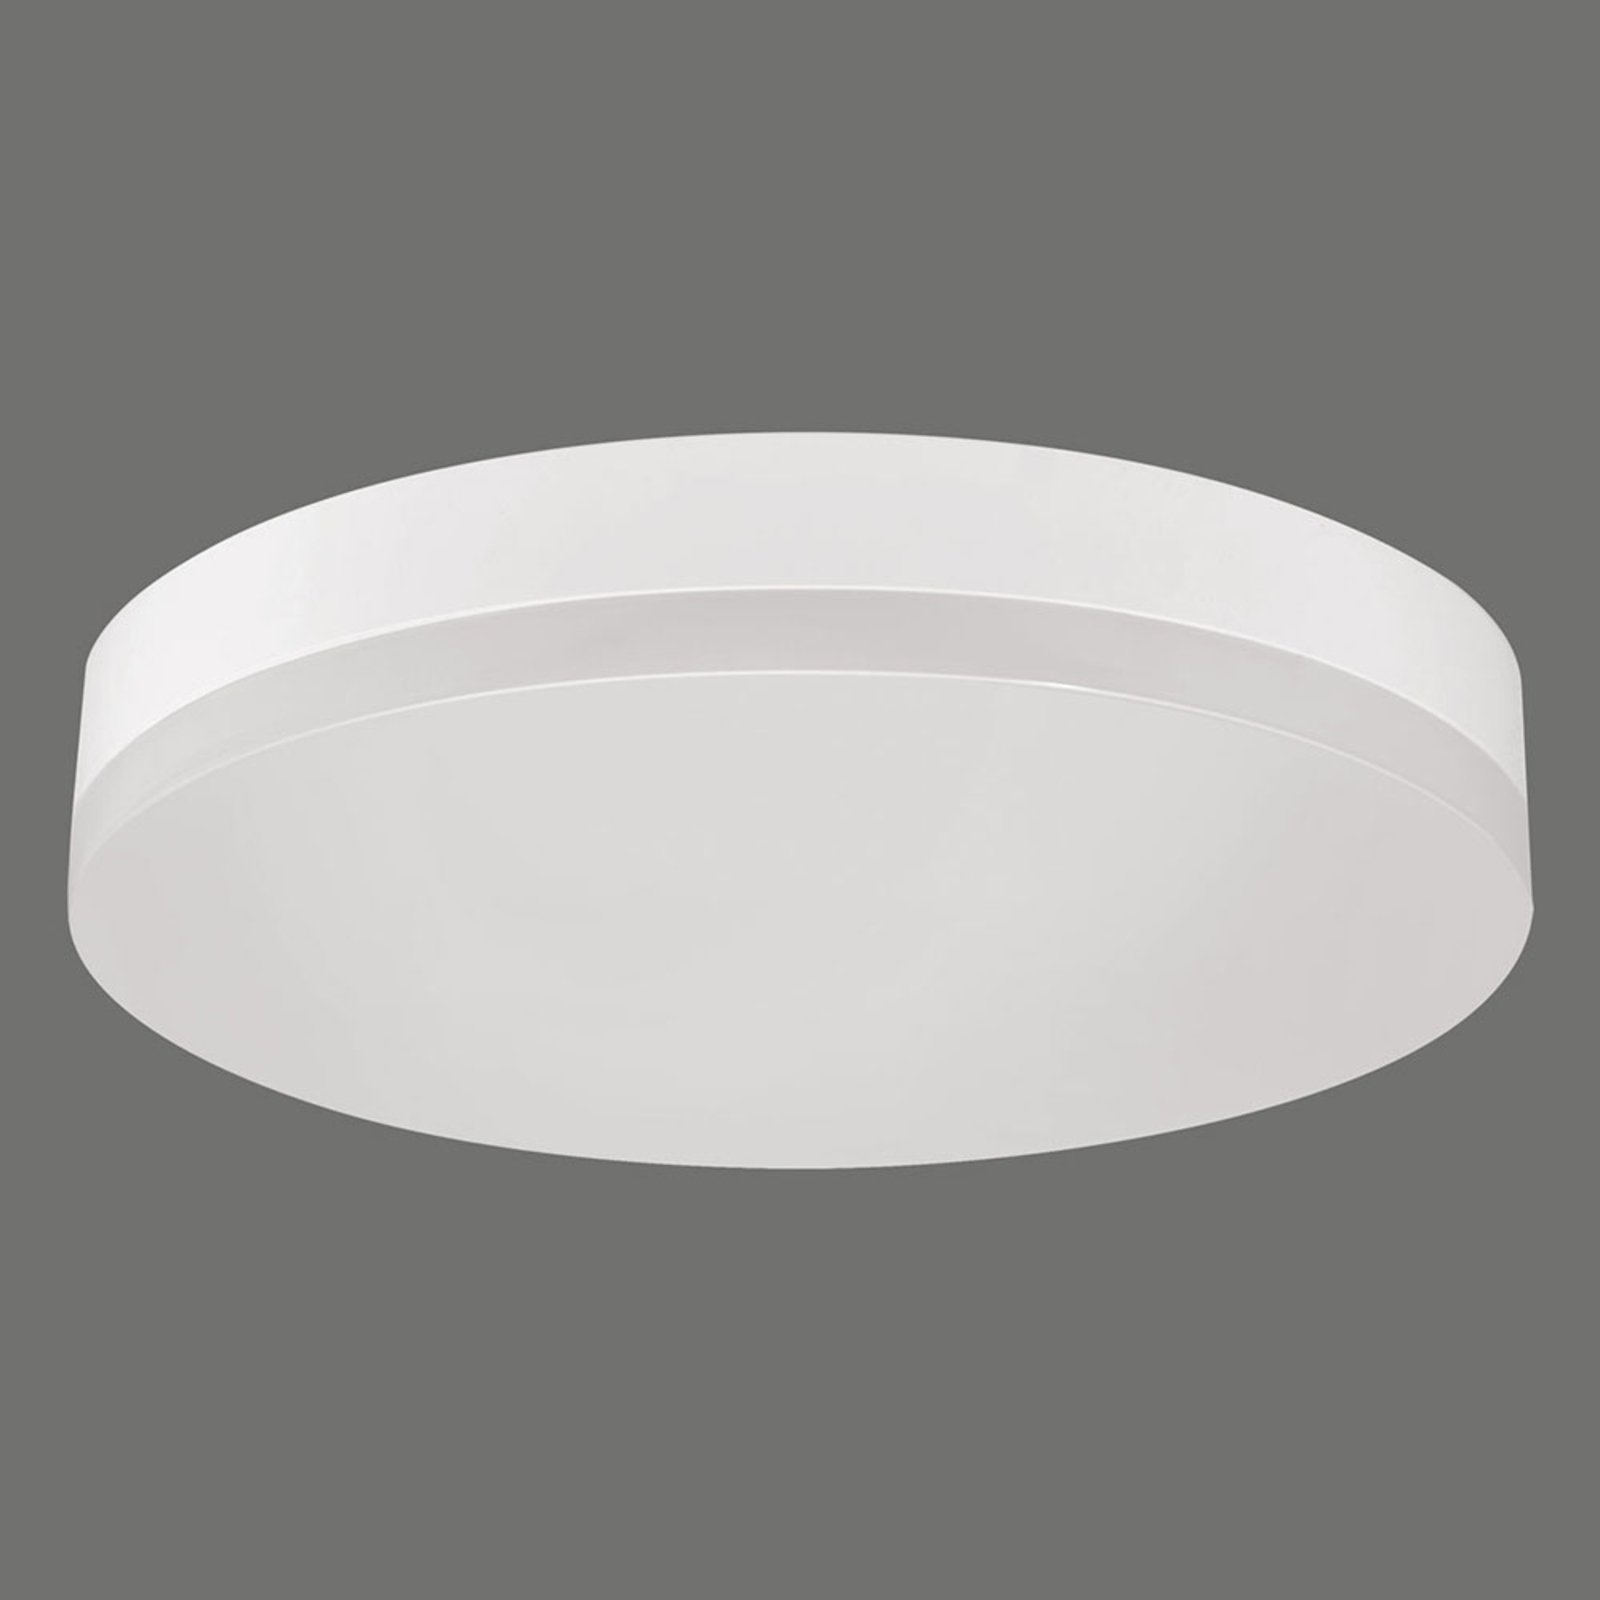 LED bathroom ceiling light Madison with motion detector